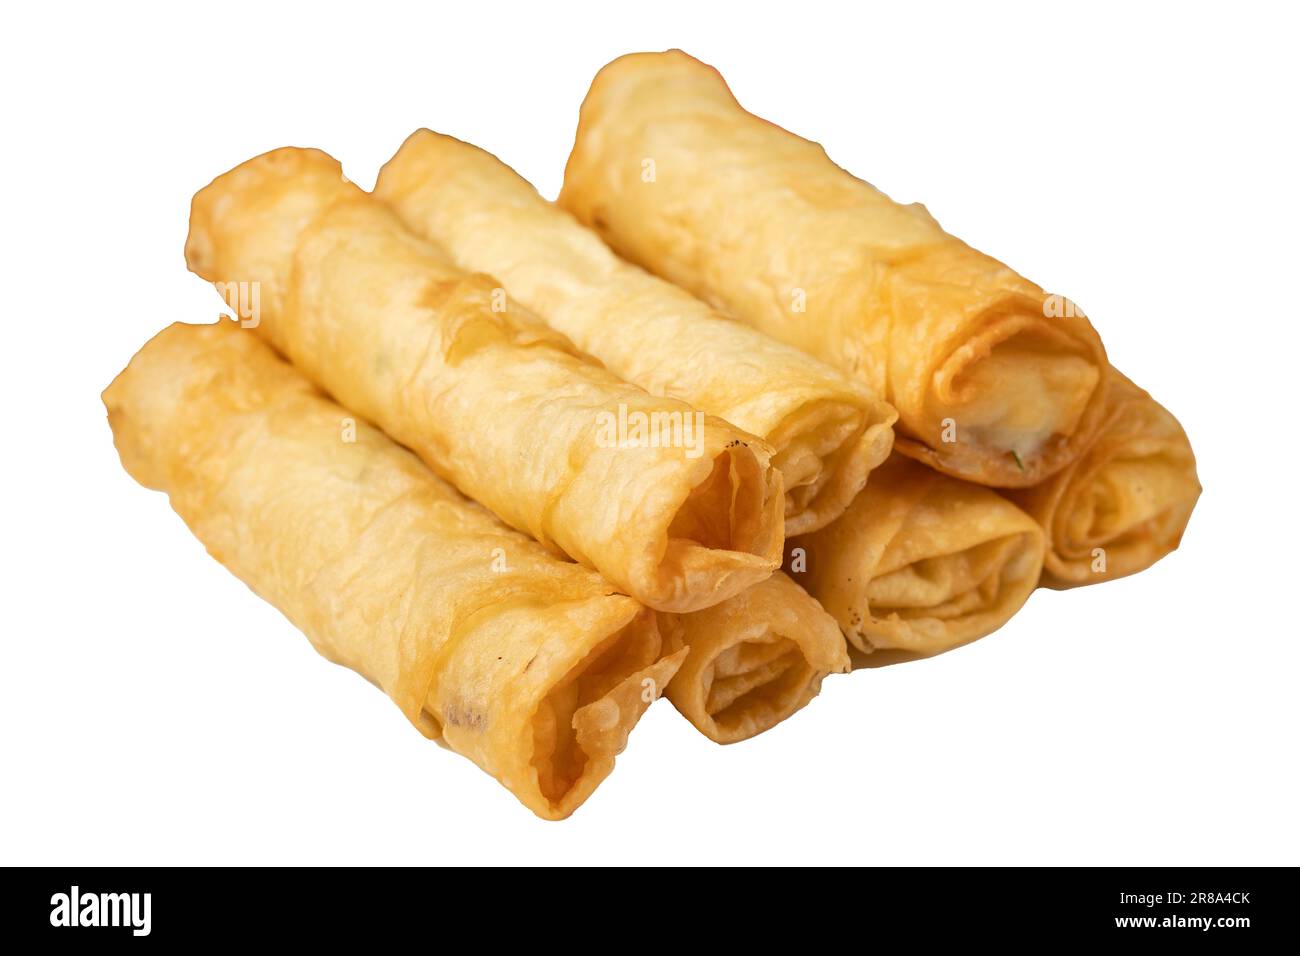 Cigarette pastry. Cheese pie isolated on white background. Fried cheese rolls with phyllo. Local name sigara boregi. Close up Stock Photo